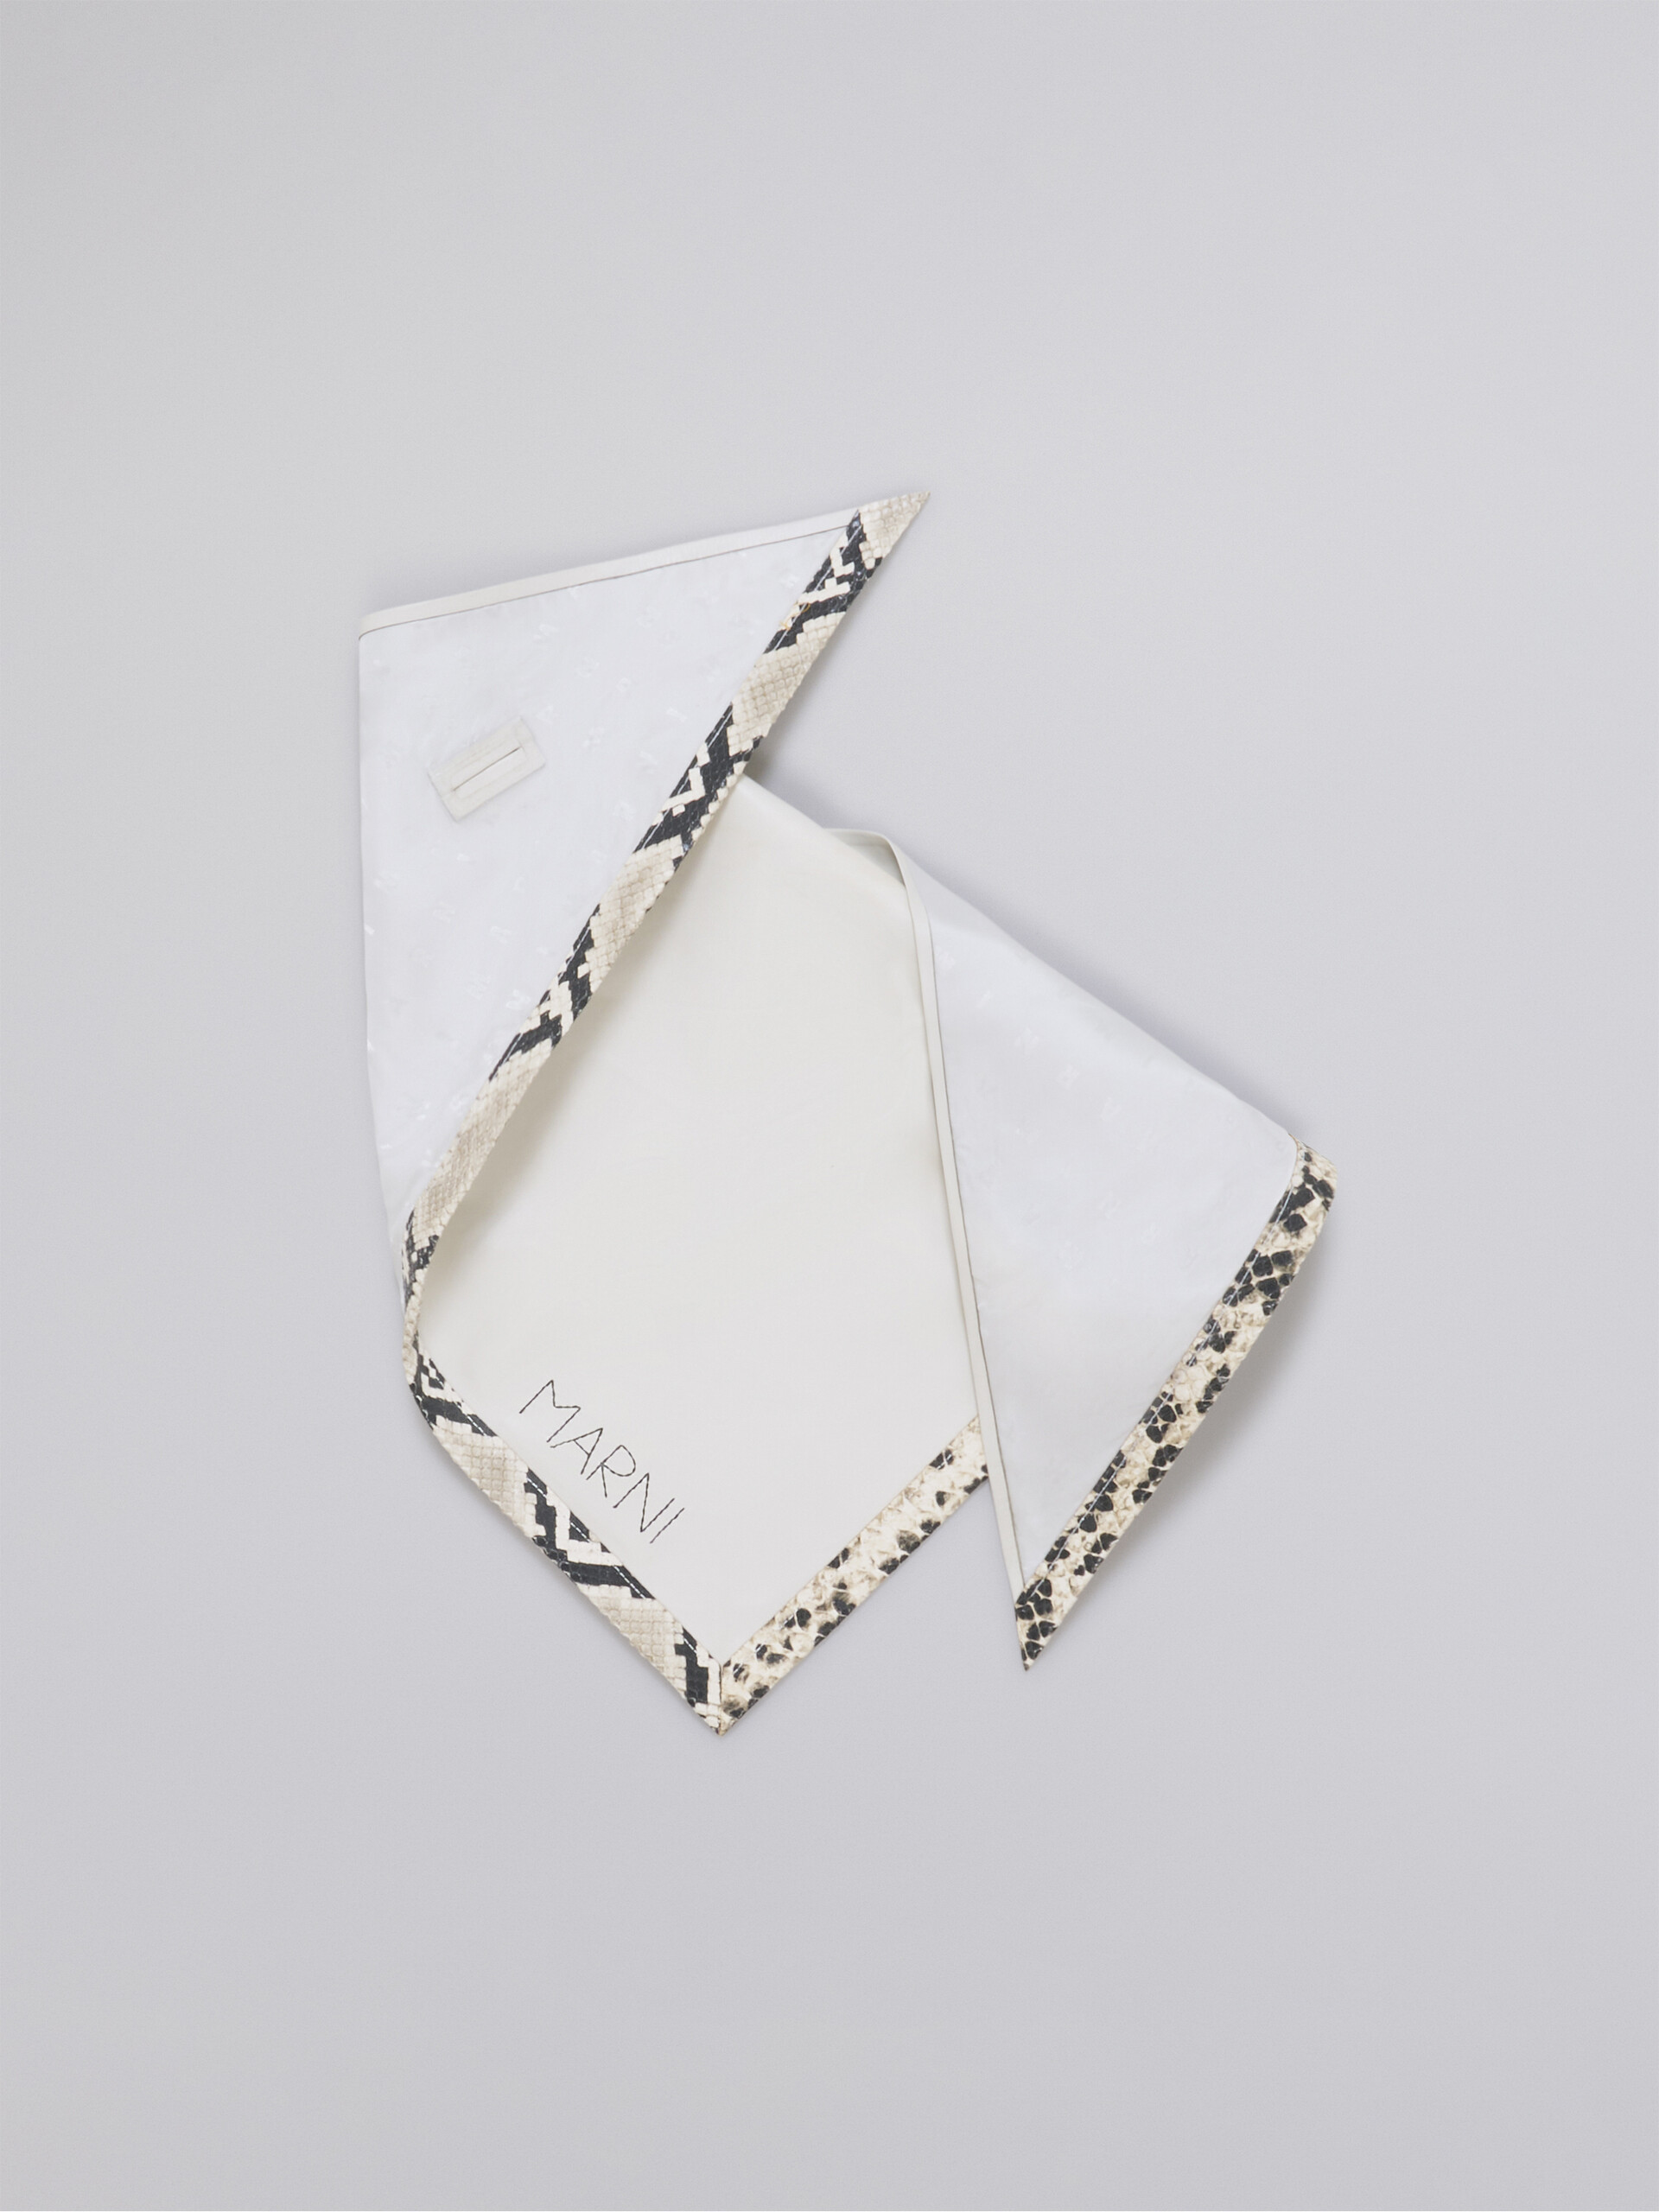 White nappa leather triangular scarf with printed python finish - Other accessories - Image 1